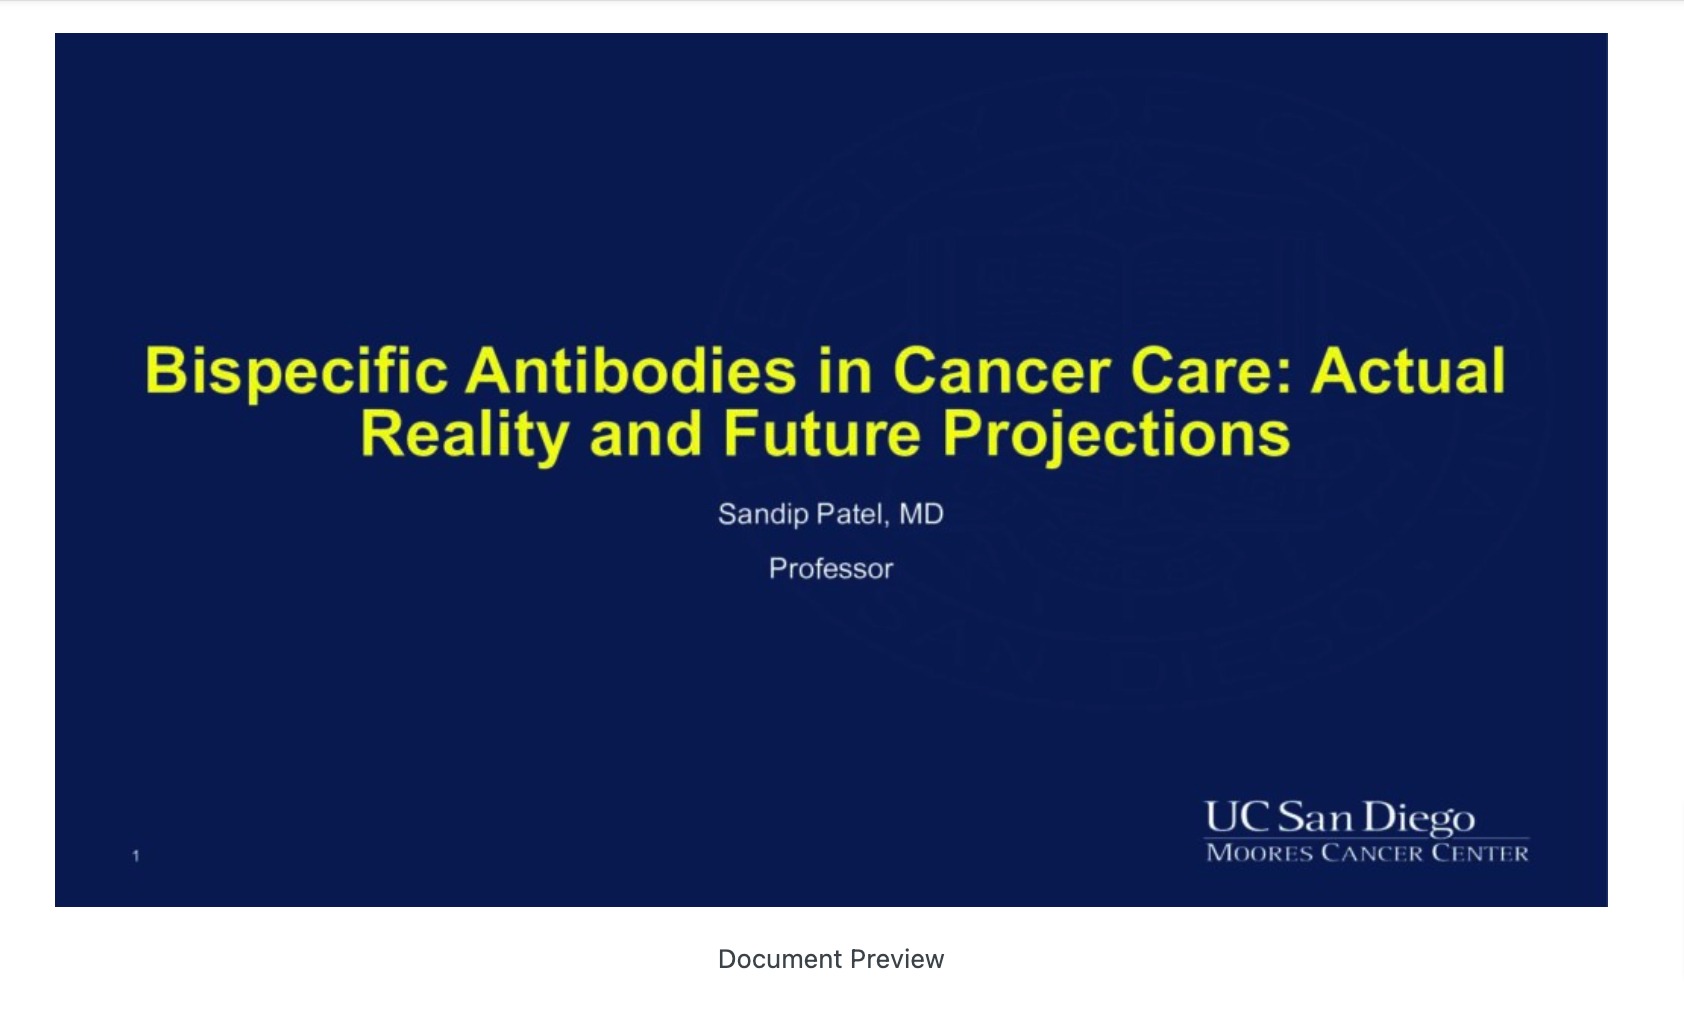 Bispecific Antibodies in Cancer Care: Actual Reality and Future Projections